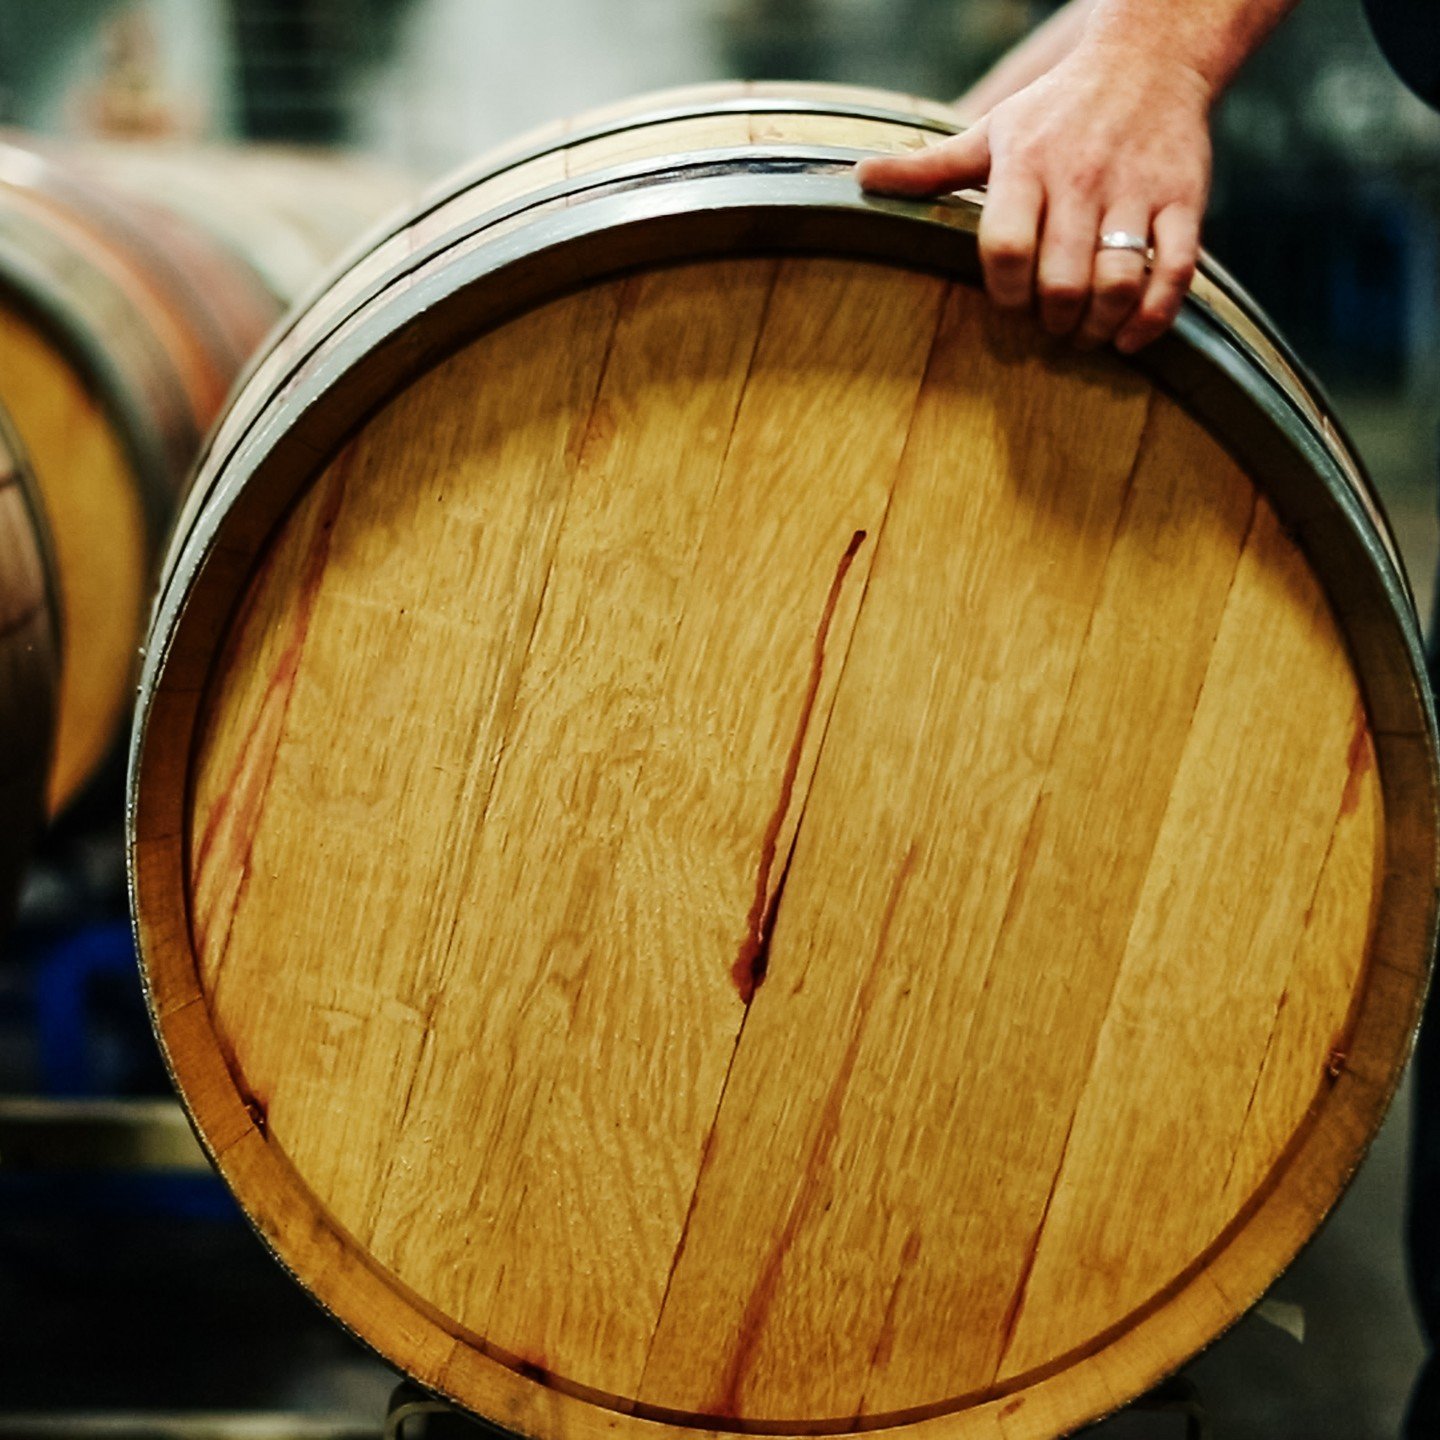 You may know your wine is aged in wooden barrels, but do you know what KIND of wood your wine is aged in?

Oak is the most popular choice for wine barrels. 
Not only is it a sturdy and porous wood, but it departs flavors consistently and strongly. Th